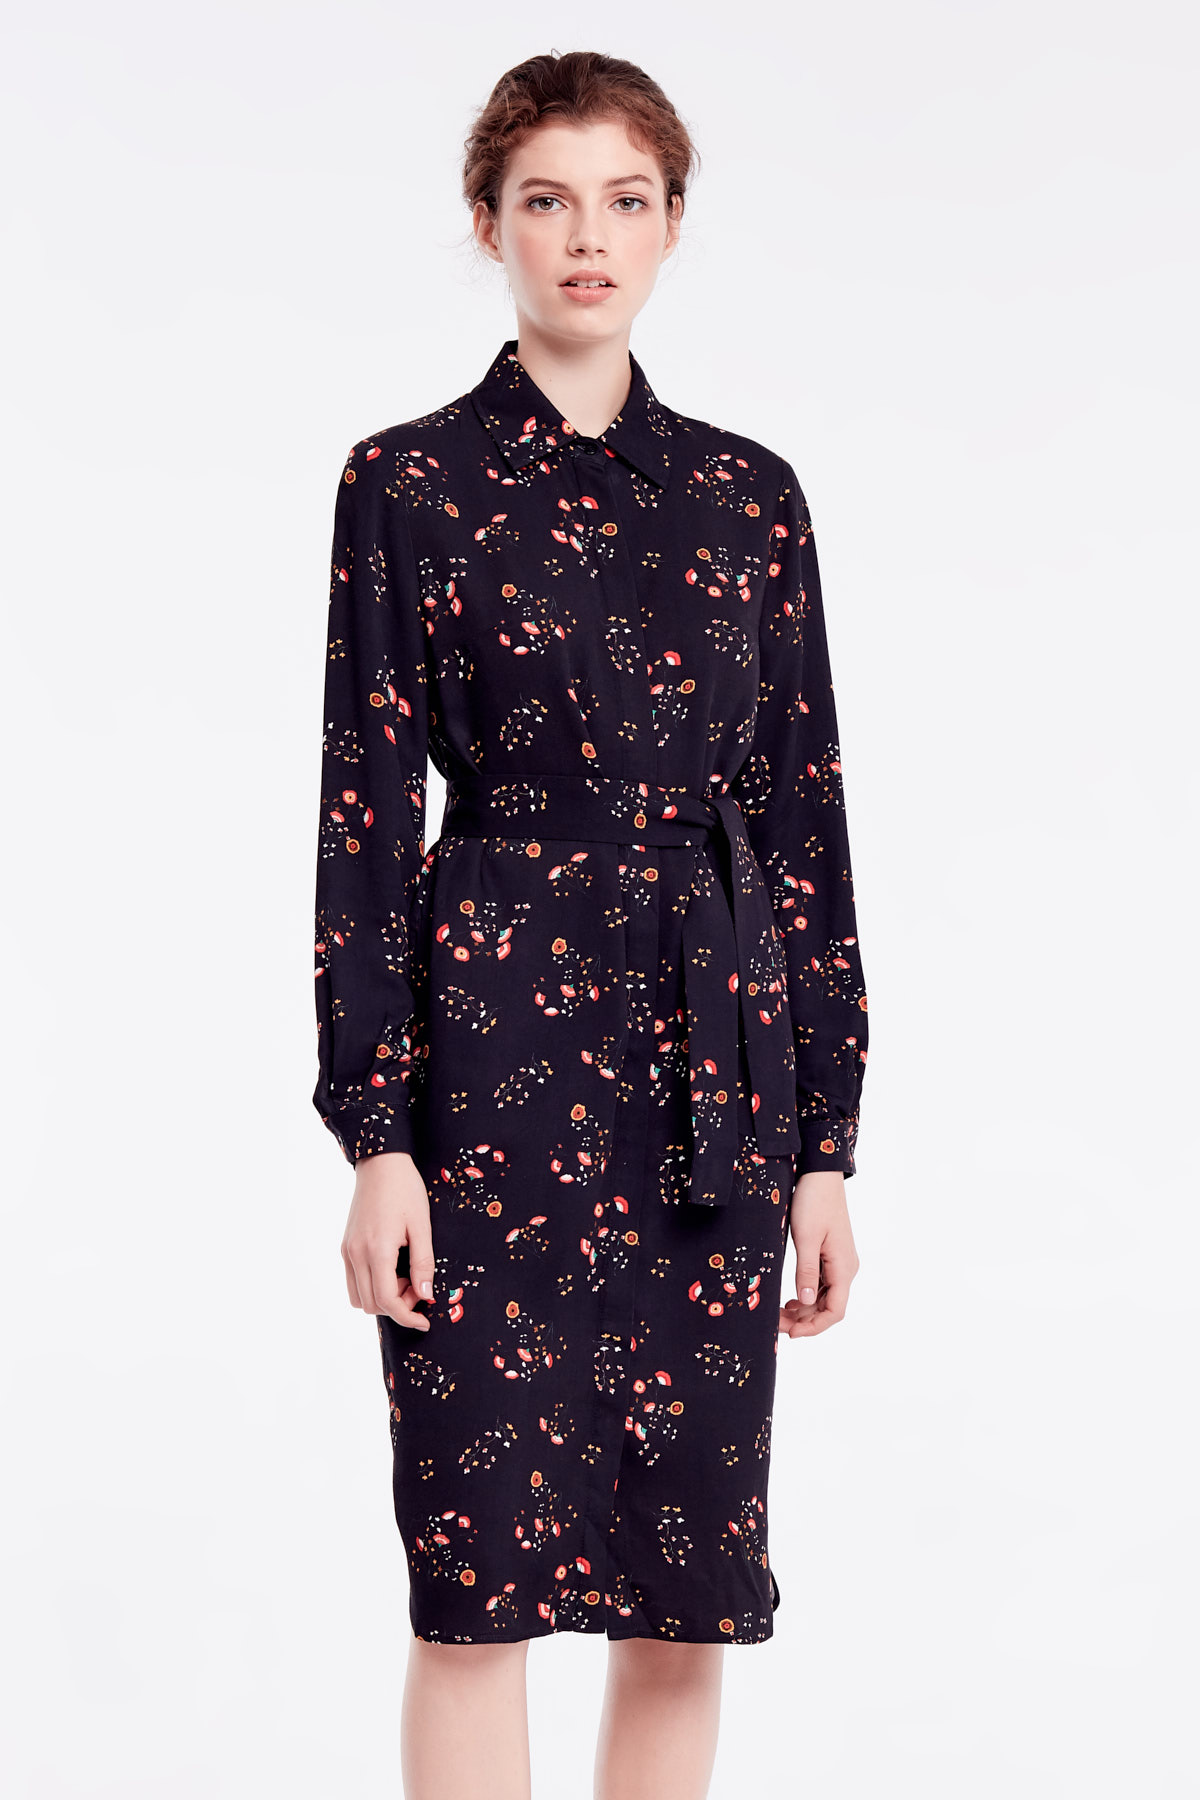 Black floral dress with a concealed placket, photo 1